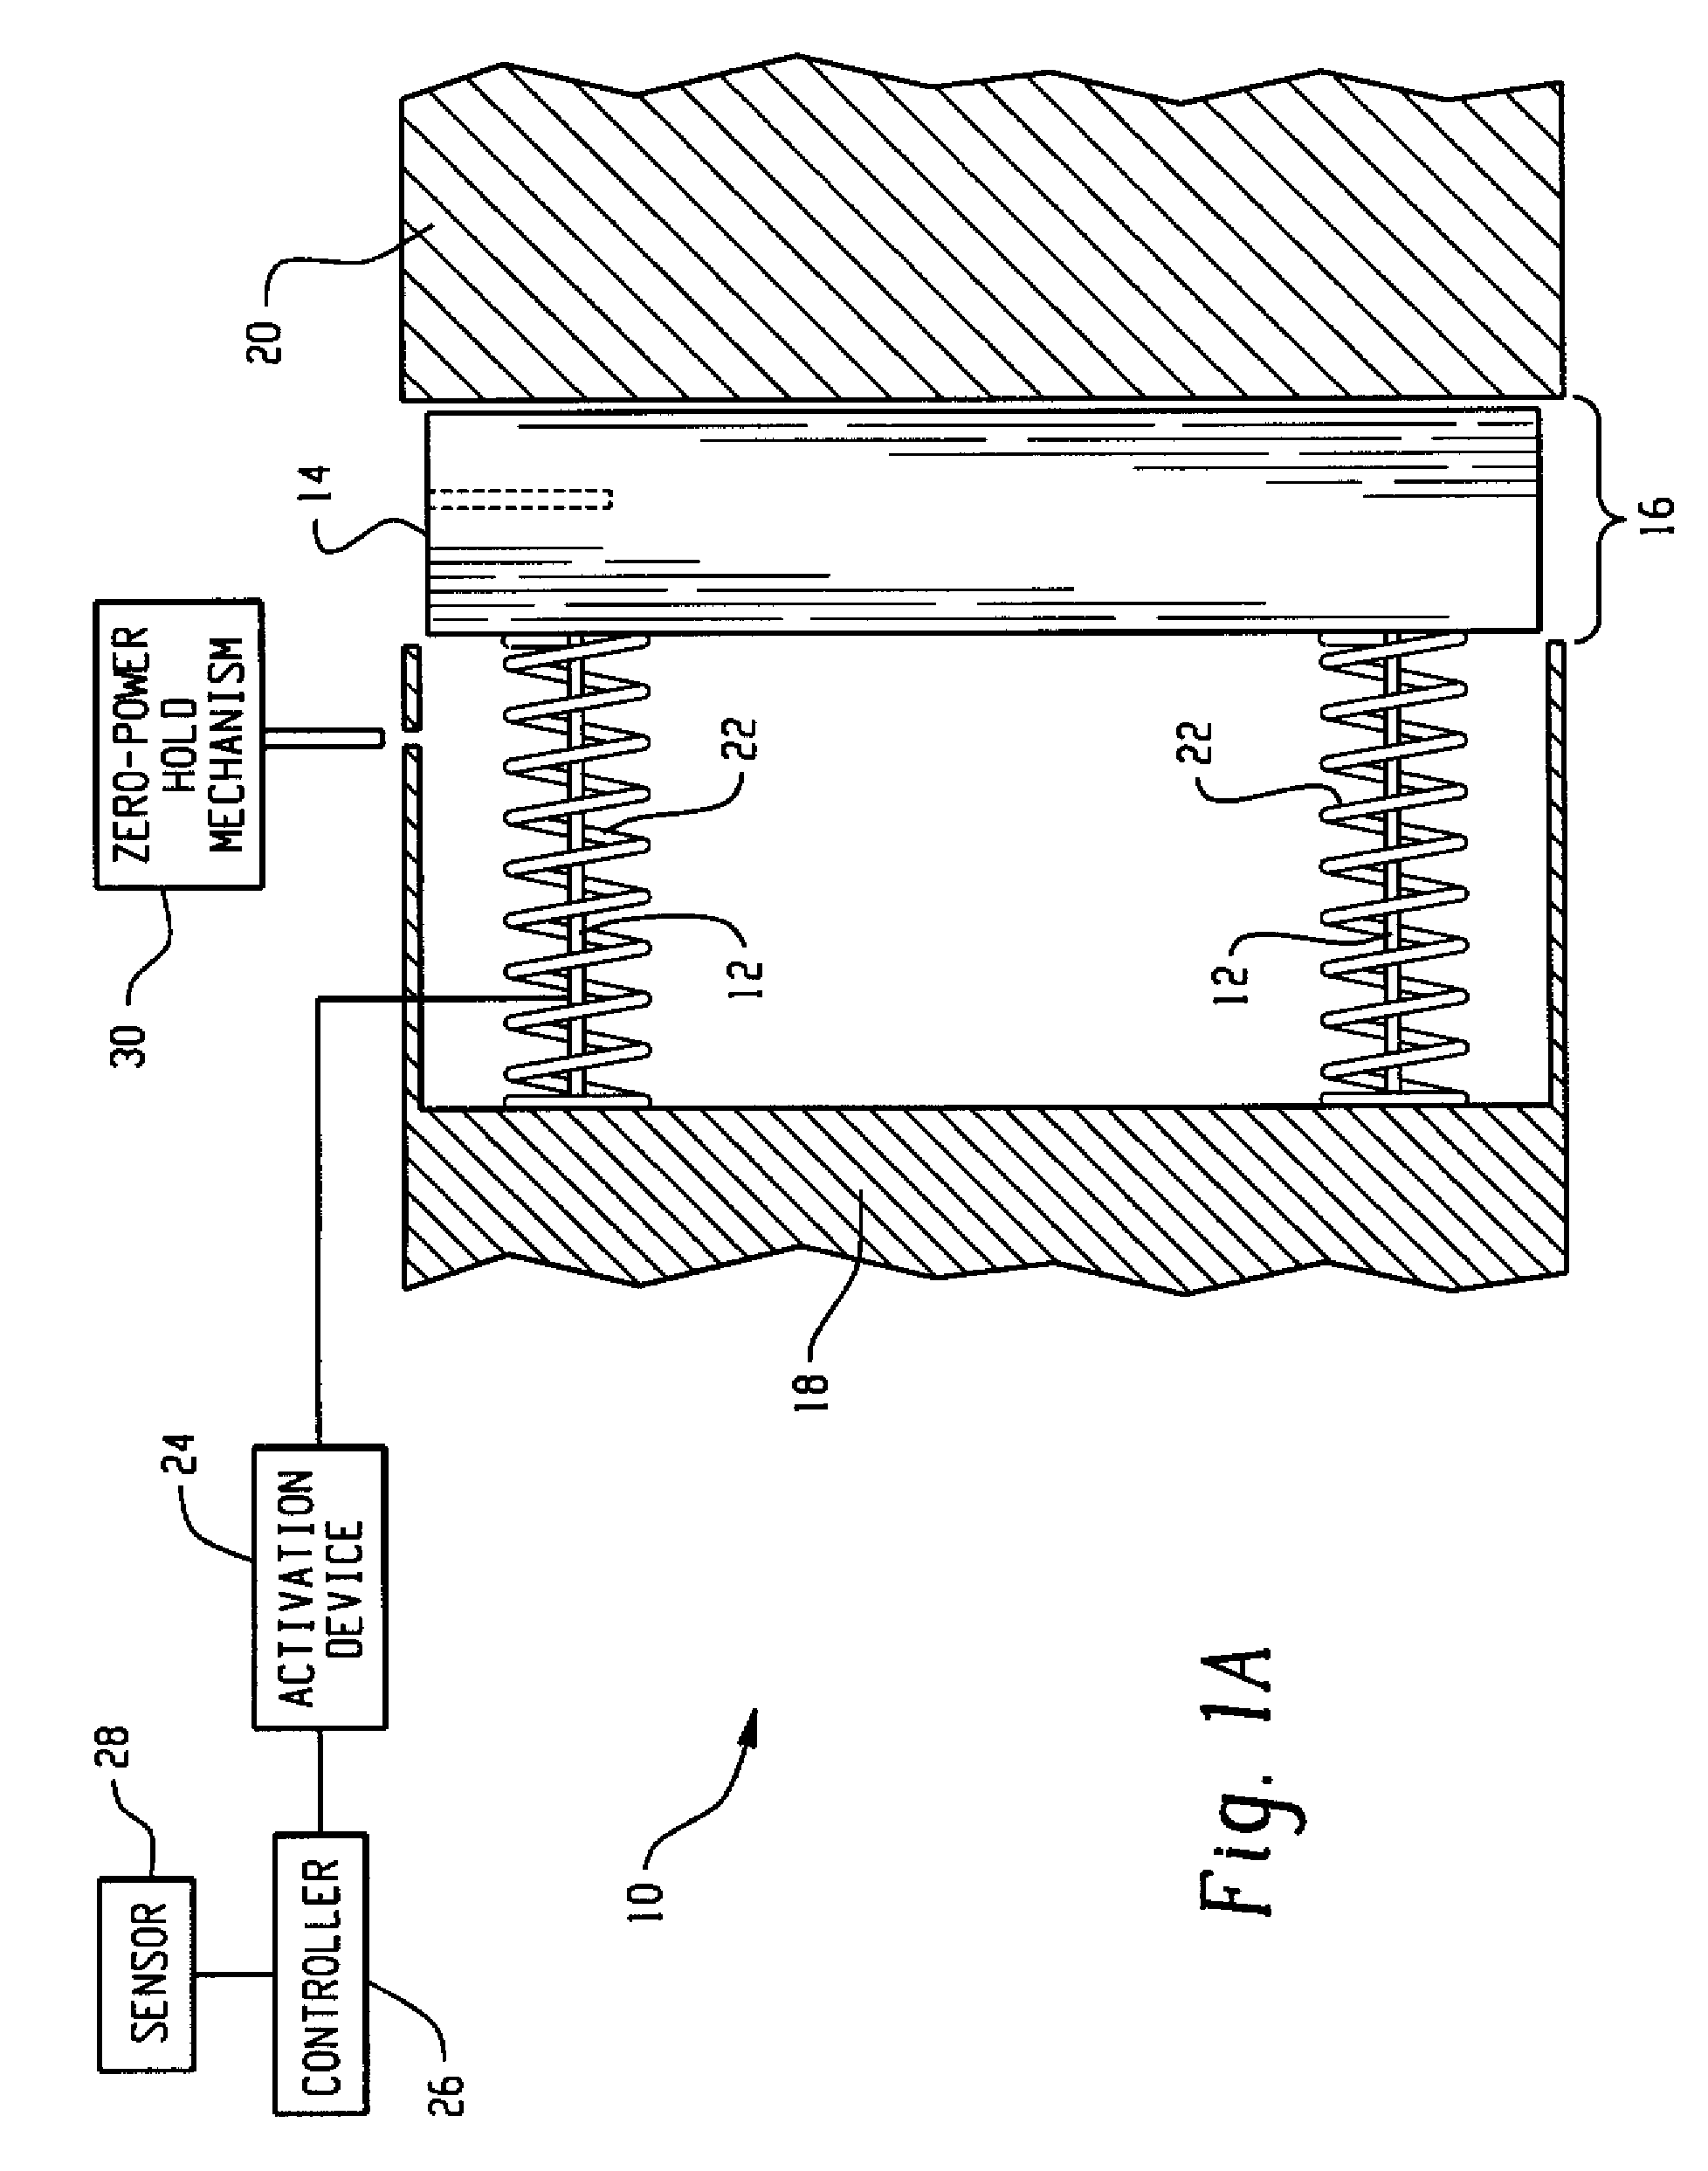 Active material based concealment devices for seams